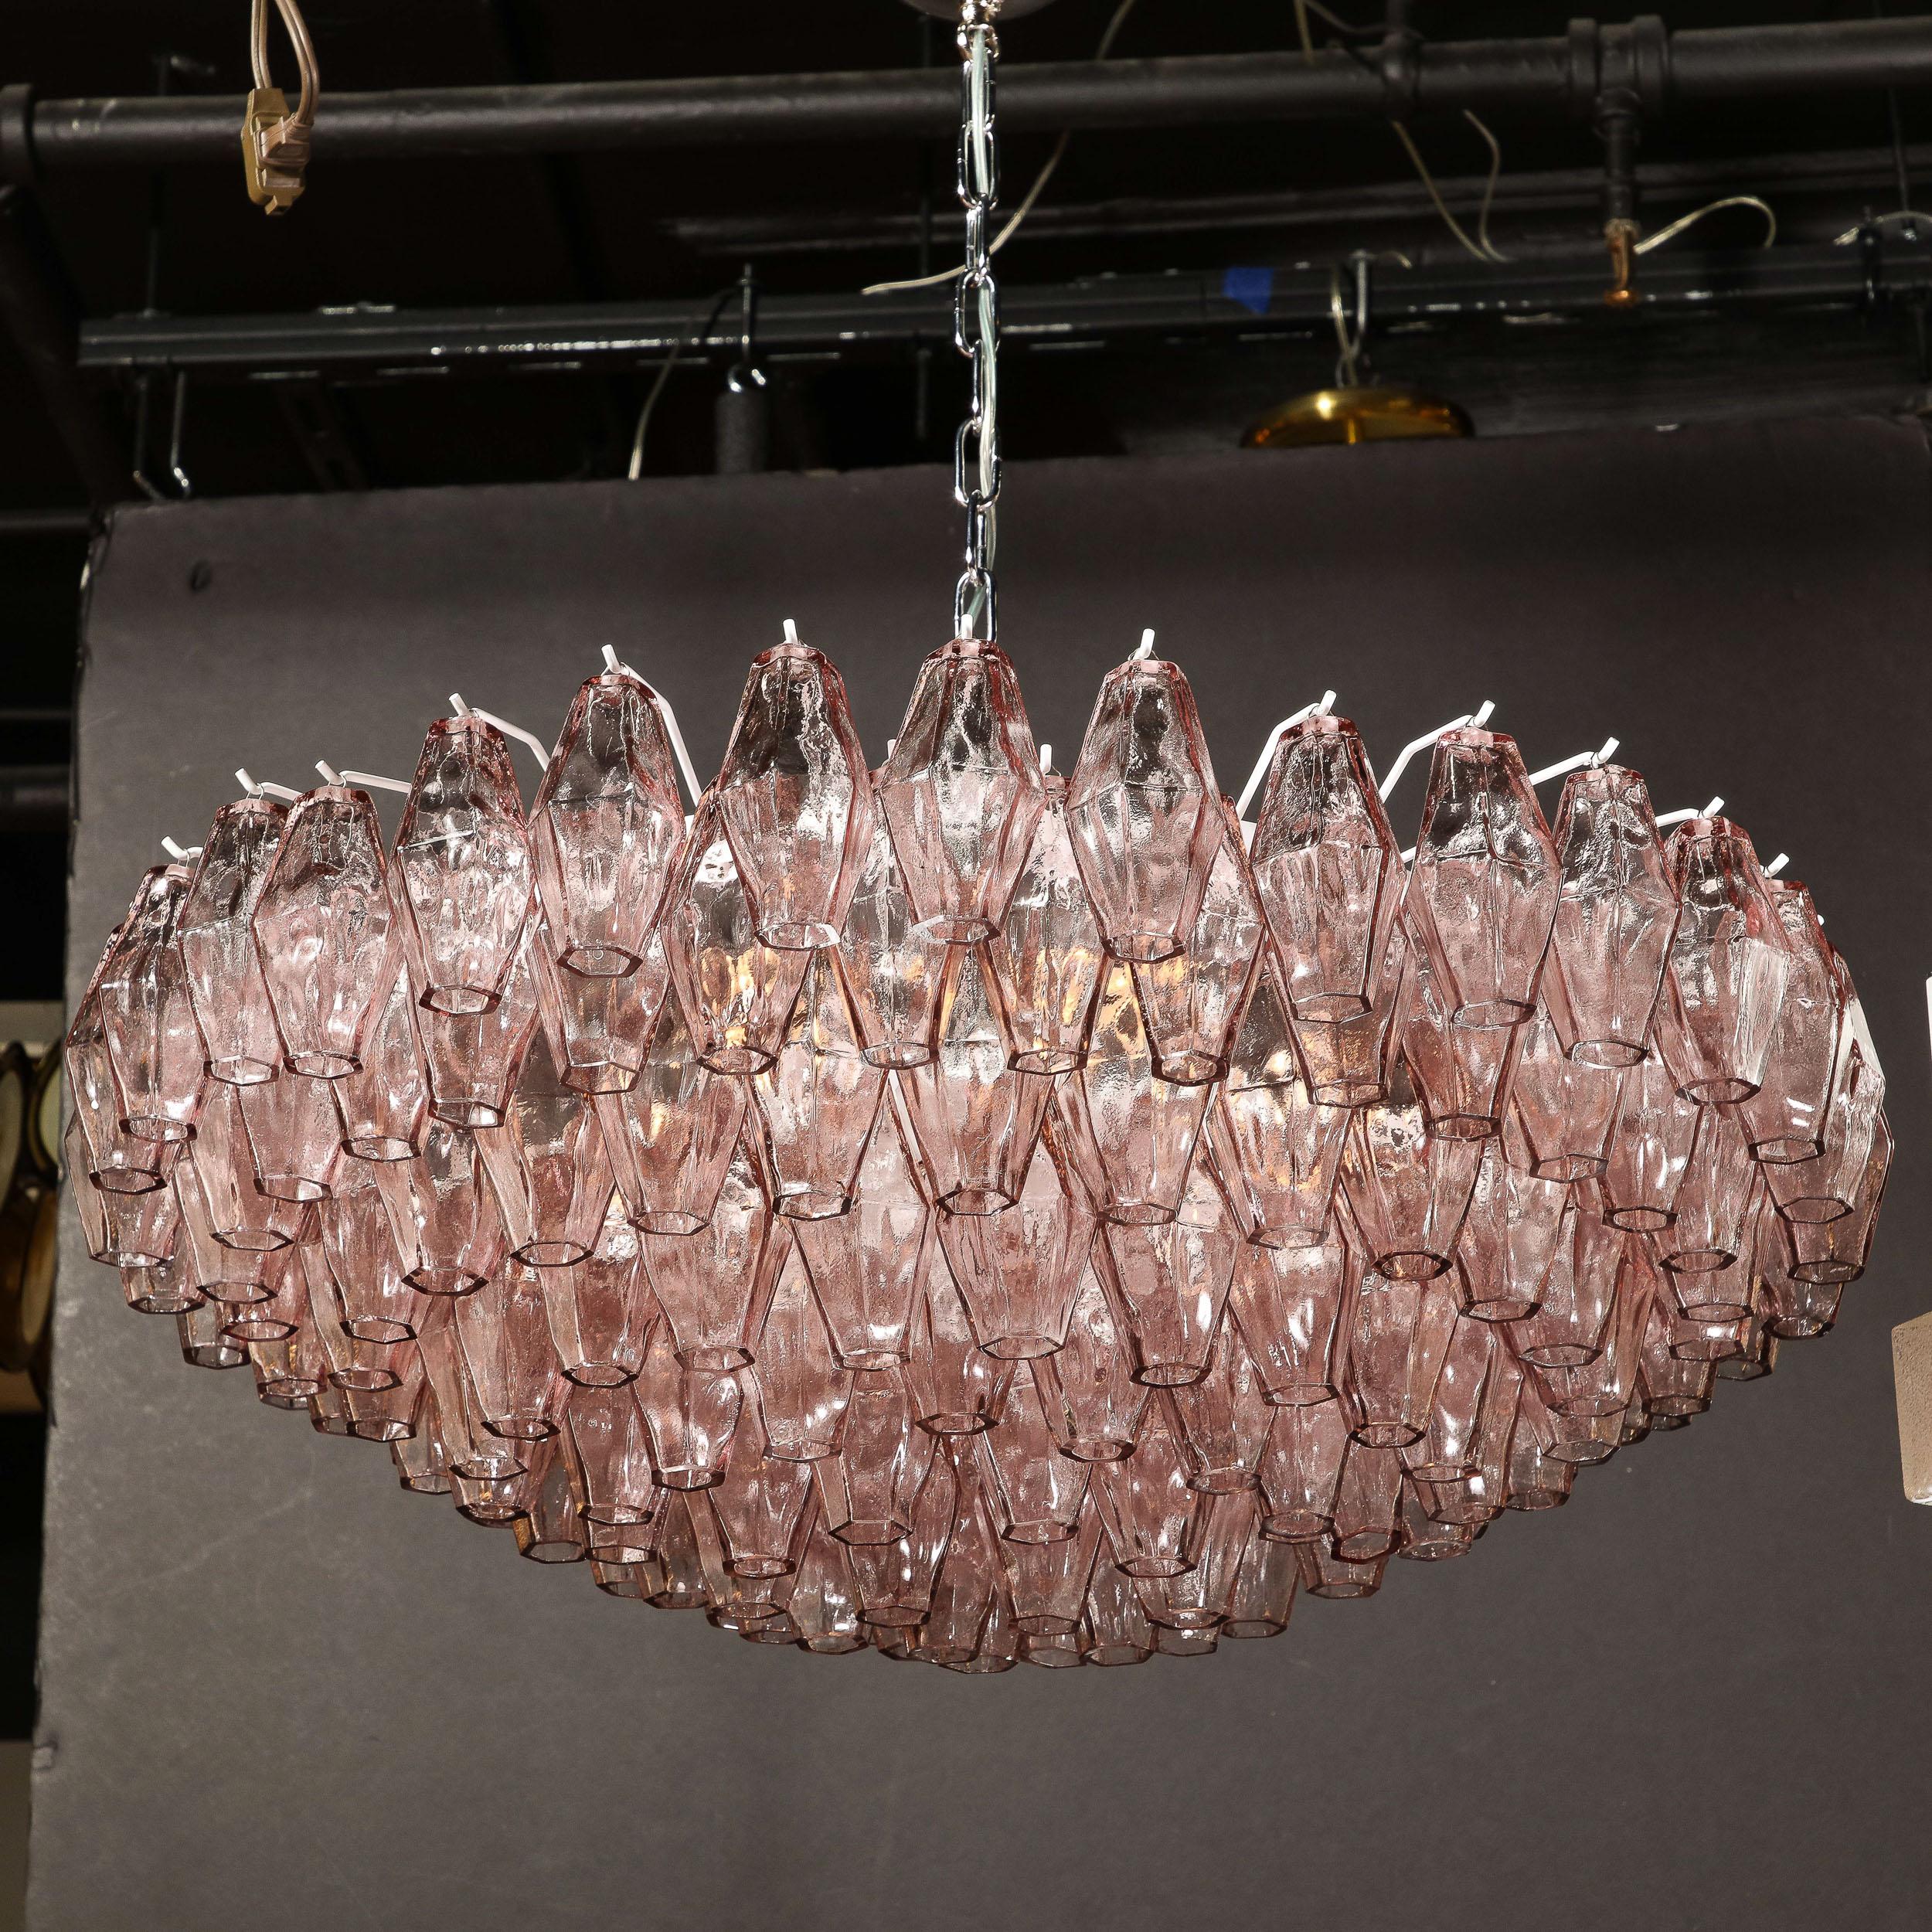 Hand-Blown Murano Glass Polyhedral Chandelier in Smoked Amethyst 9